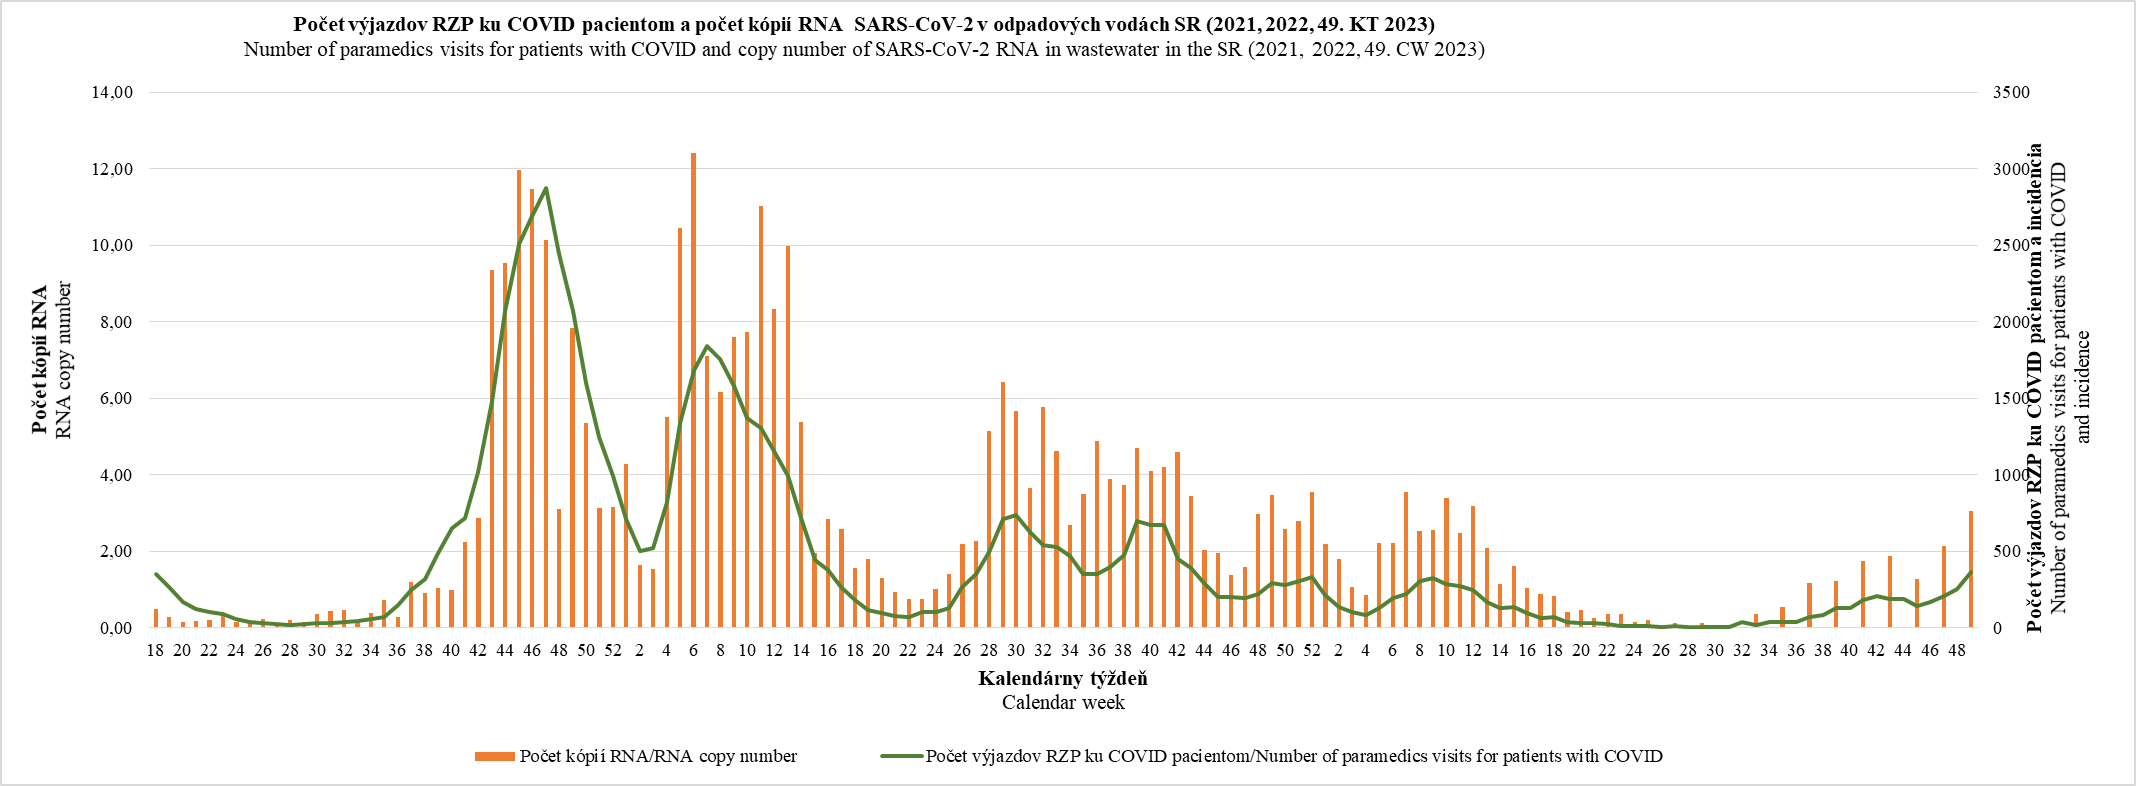 Number of paramedics visits for patients with COVID and number of SARS-CoV-2 RNA